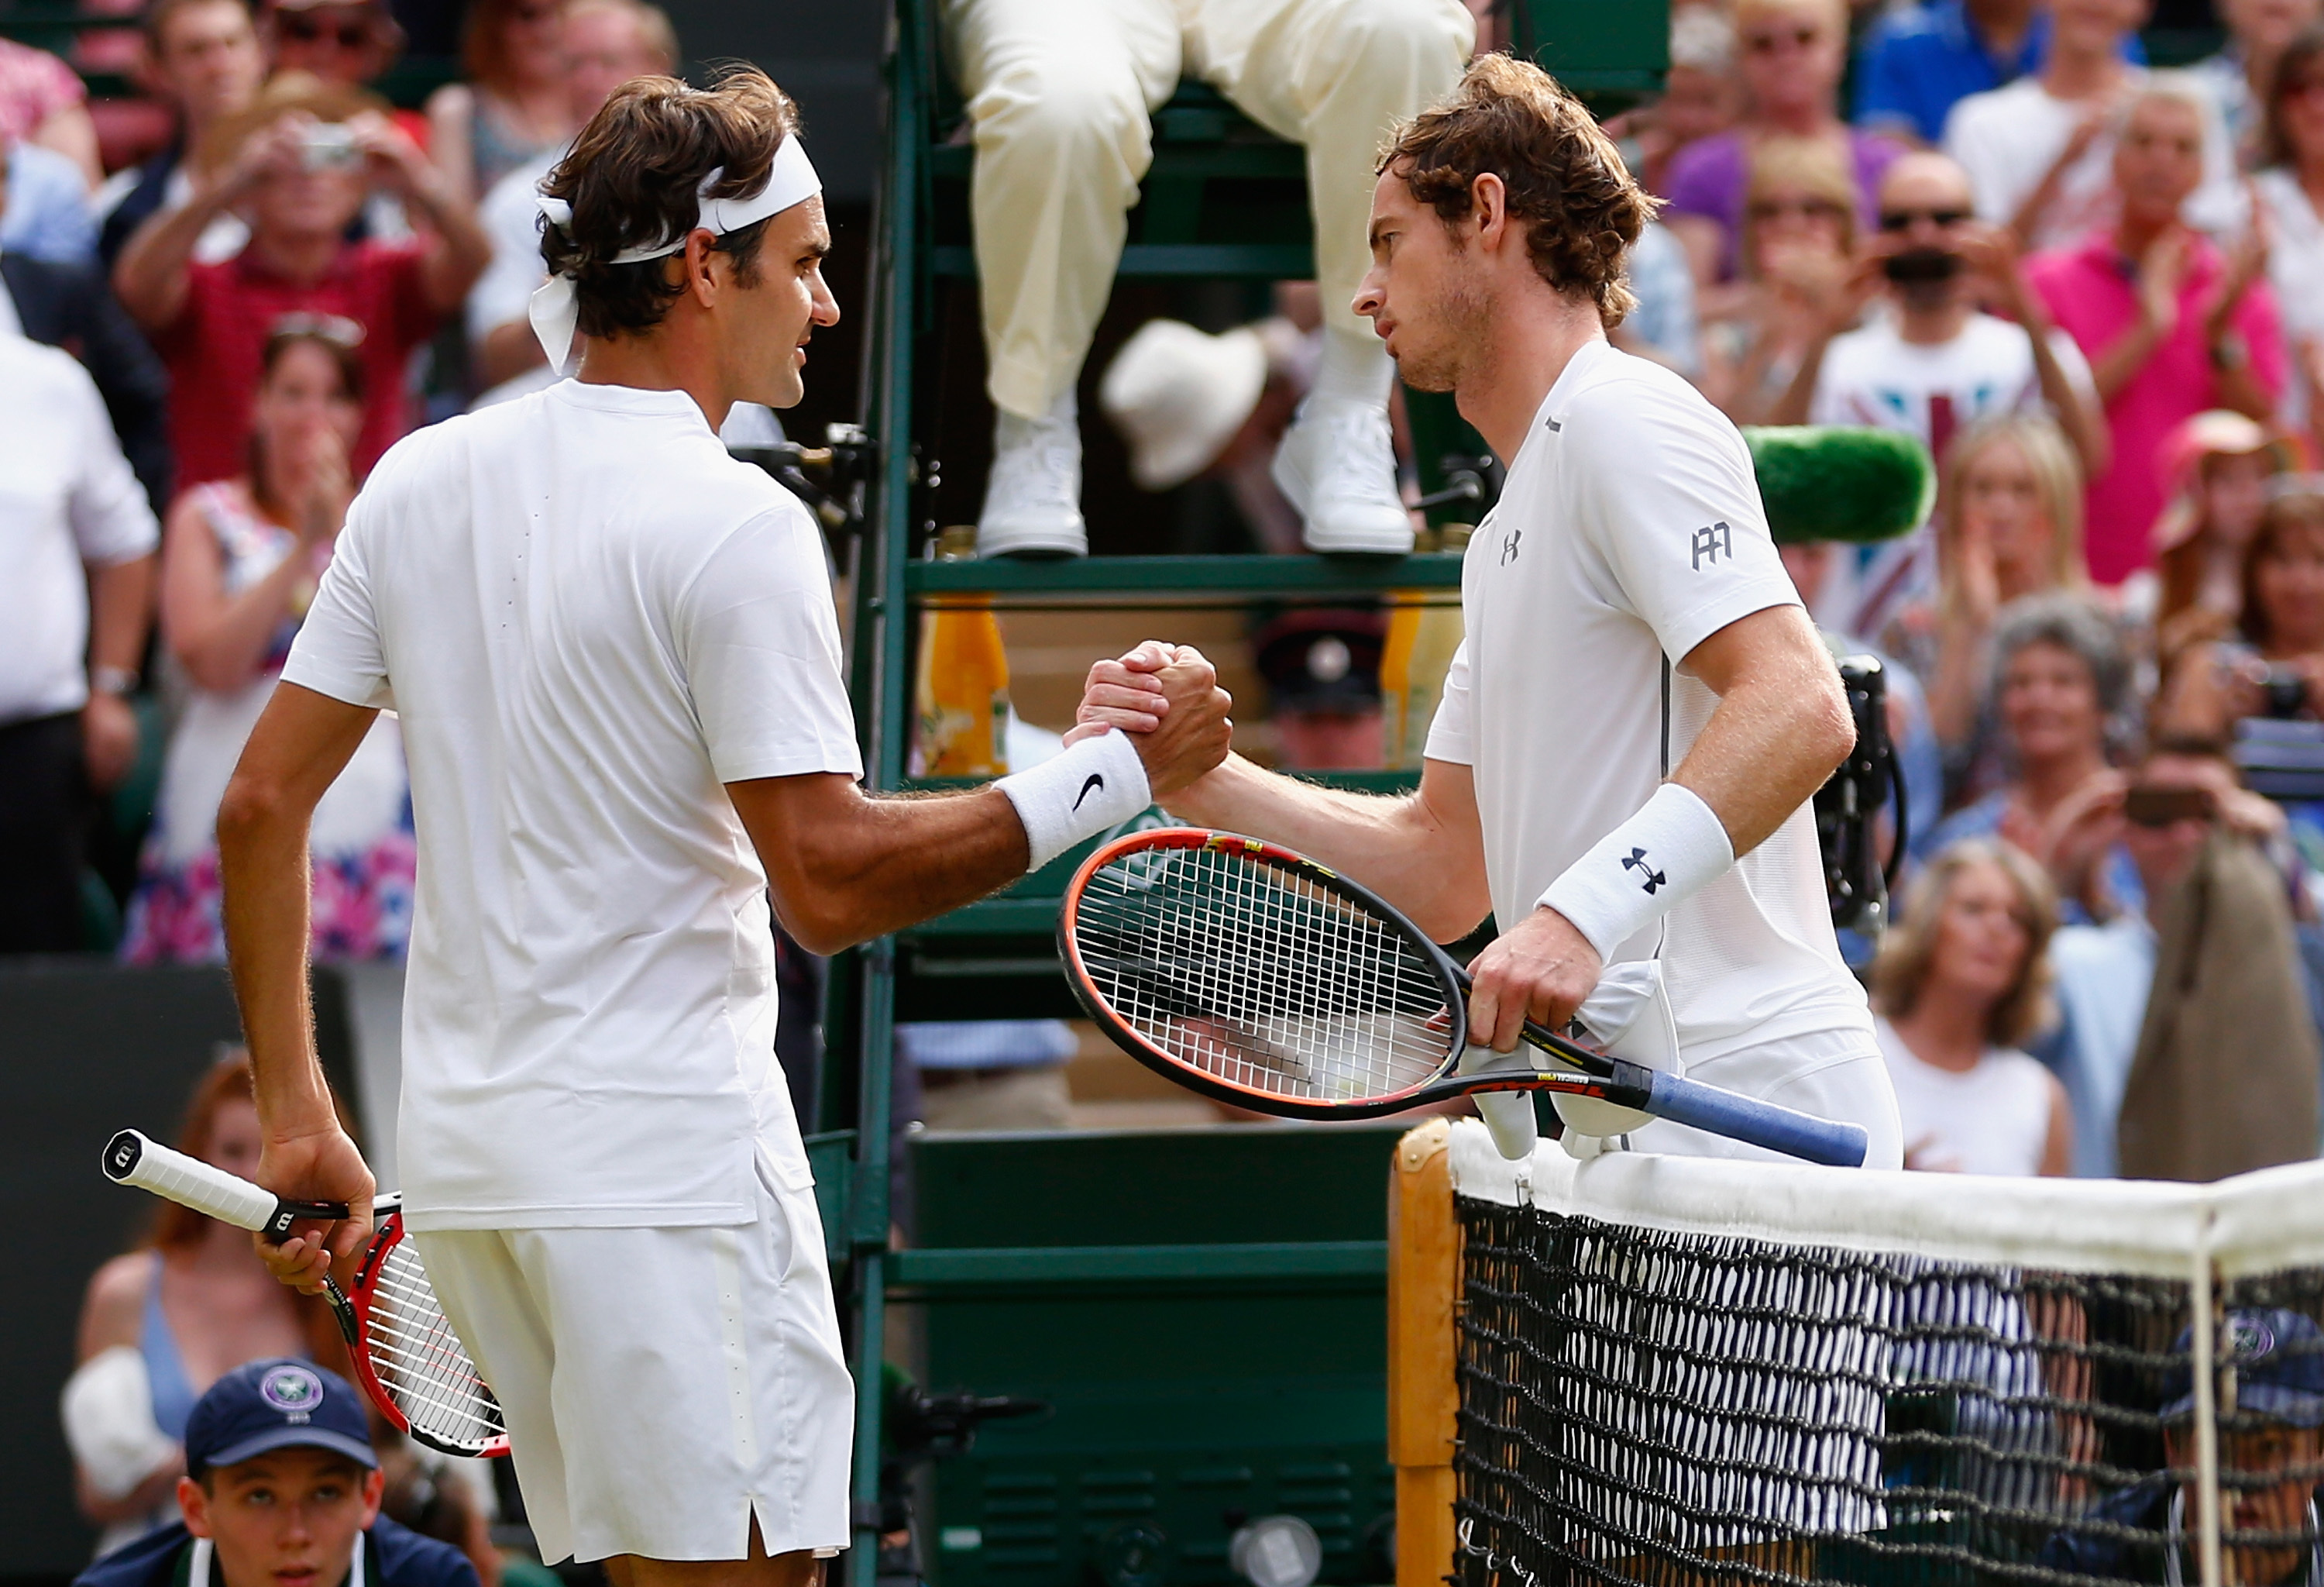 Roger Federer and Andy Murray at Wimbledon, 2015 (Photo by Julian Finney/Getty Images)